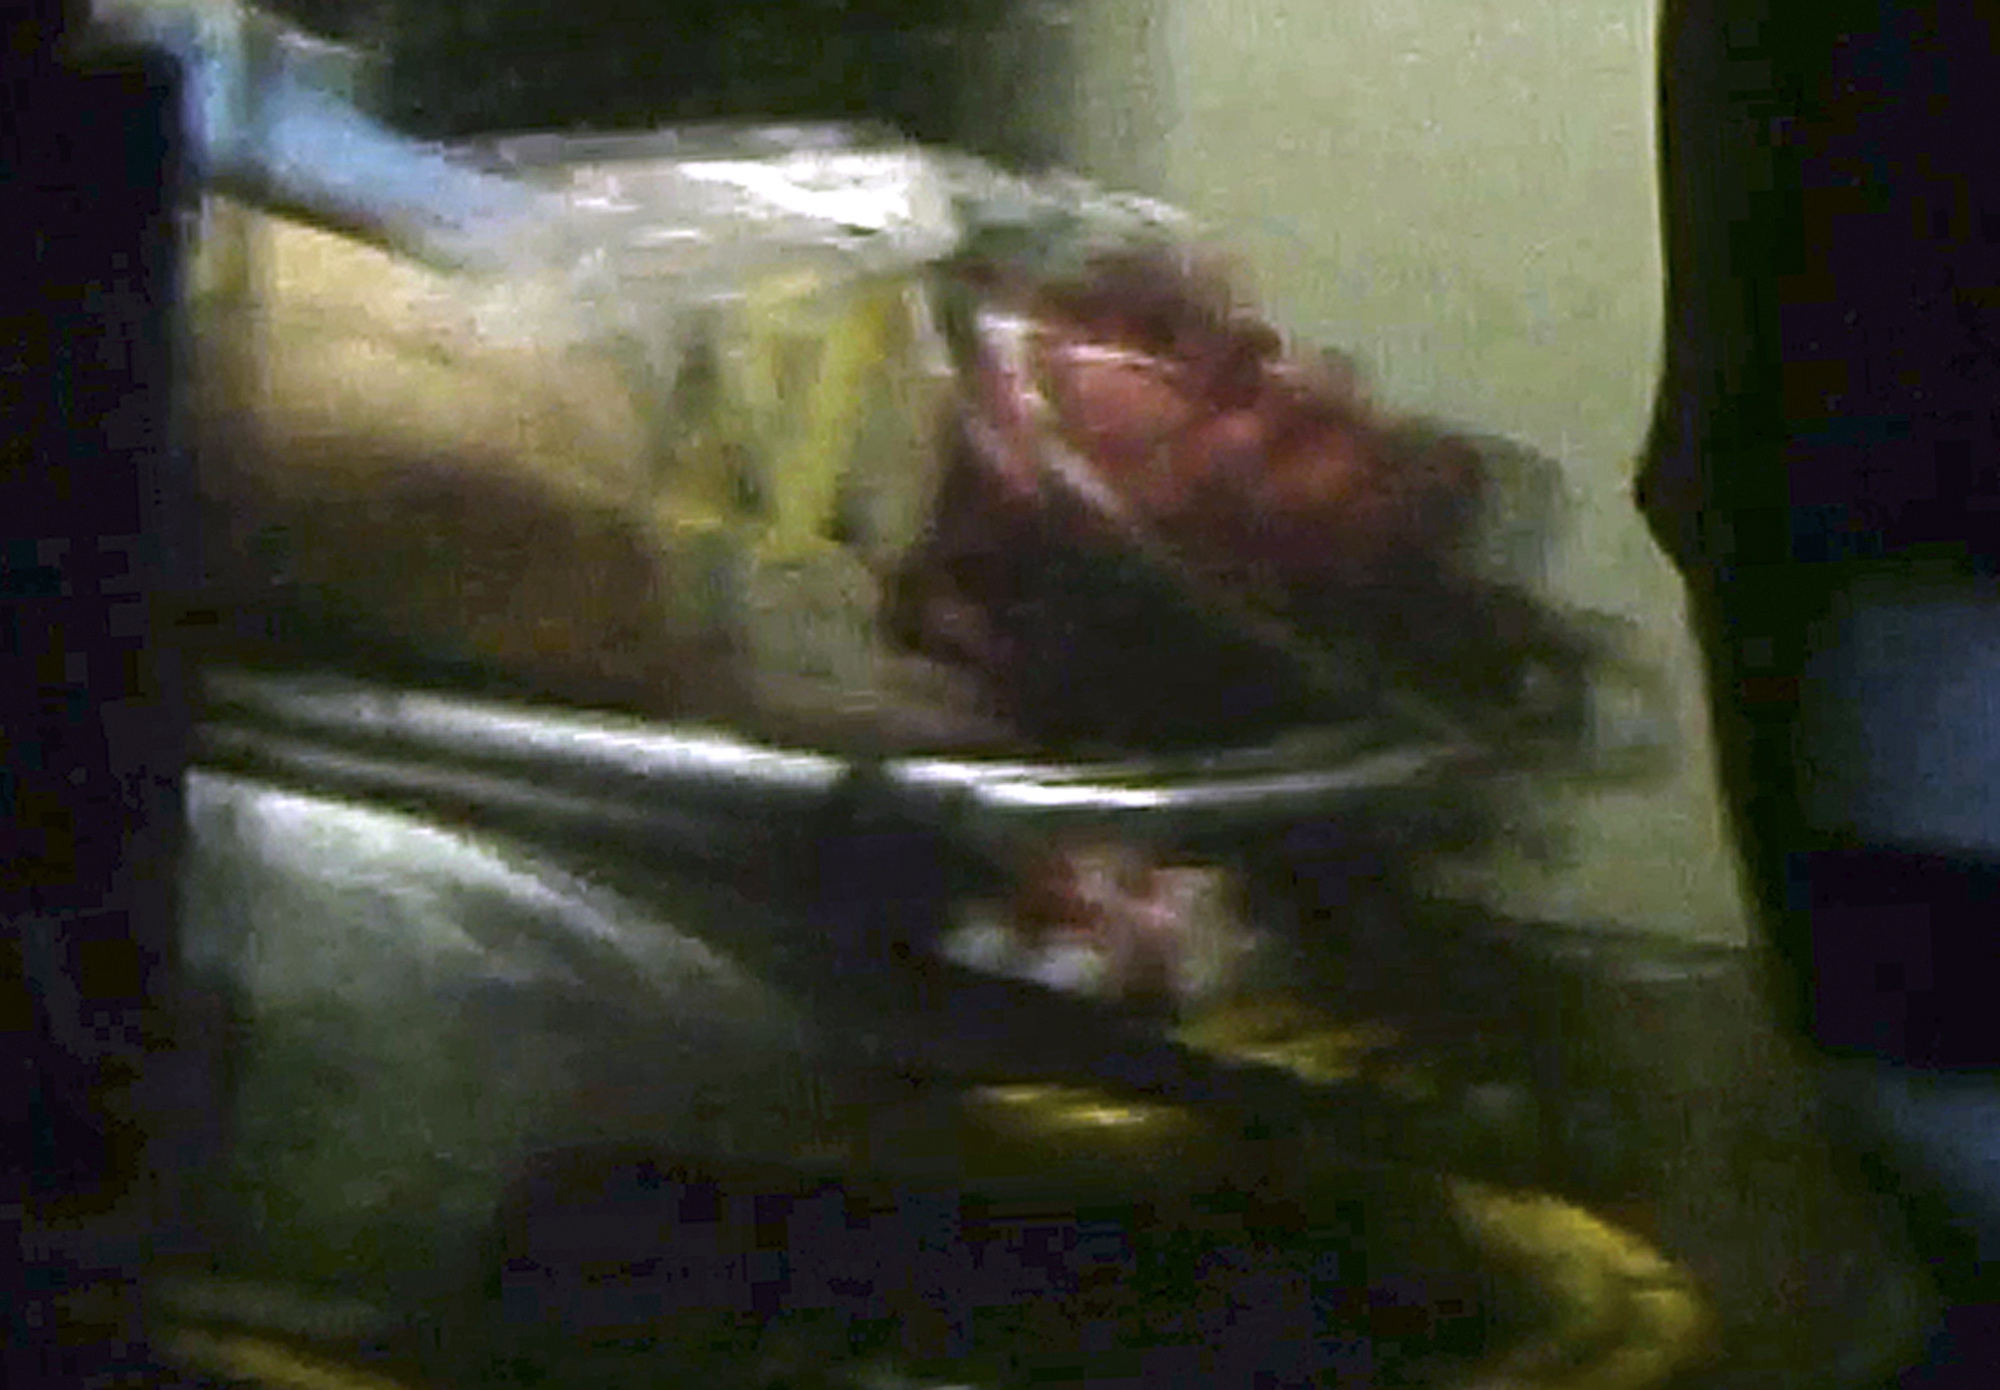 This still frame from video shows Boston Marathon bombing suspect Dzhokhar Tsarnaev visible through an ambulance after he was captured in Watertown, Mass., on Friday.